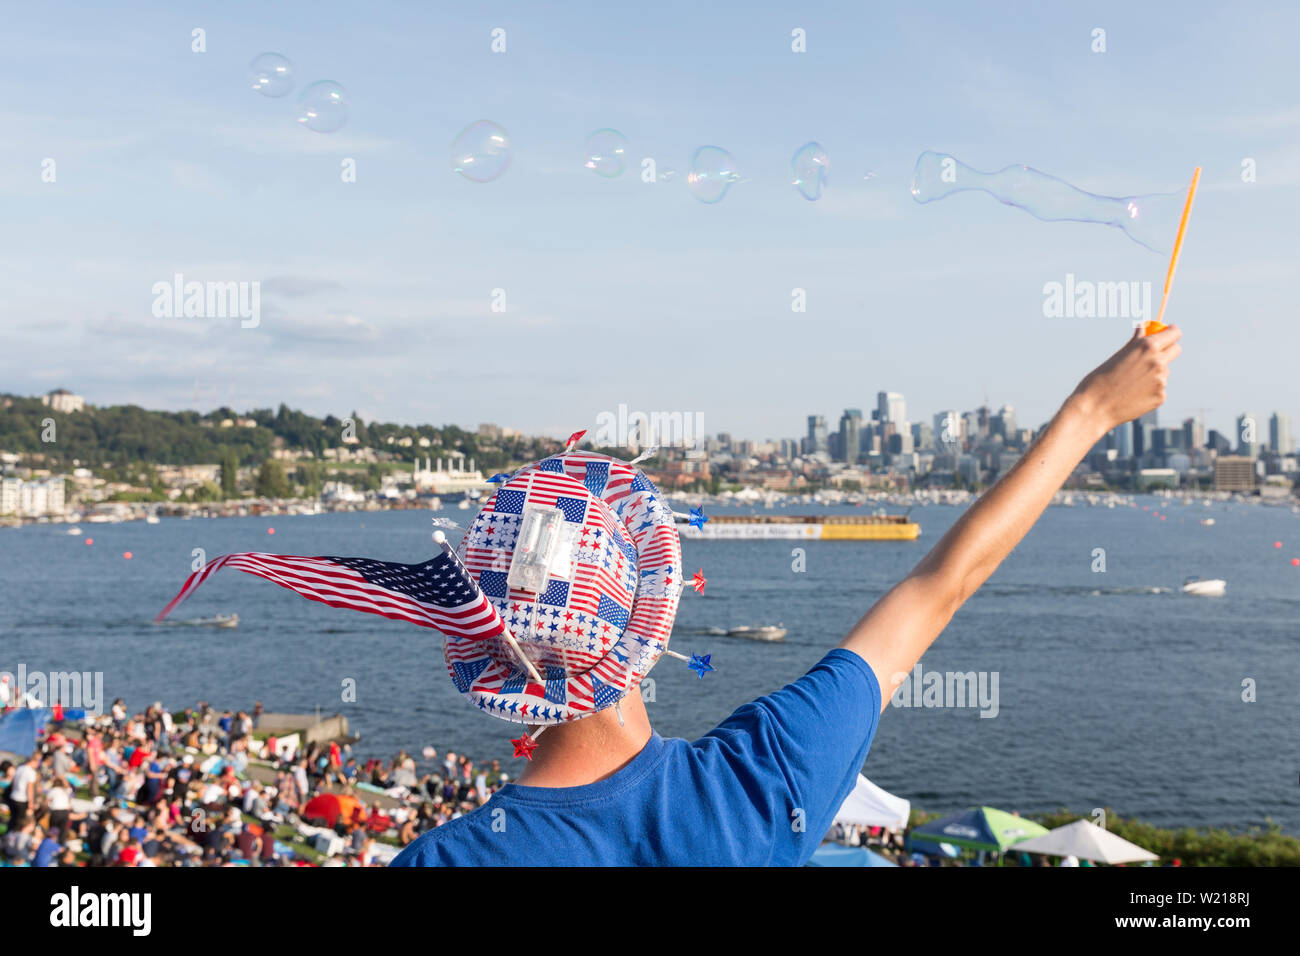 A man in patriotic American garb makes soap bubbles over the crowd at the Seafair Summer Fourth Independence Day Celebration at Gas Works Park on July 4, 2019 in Seattle, Washington. Stock Photo